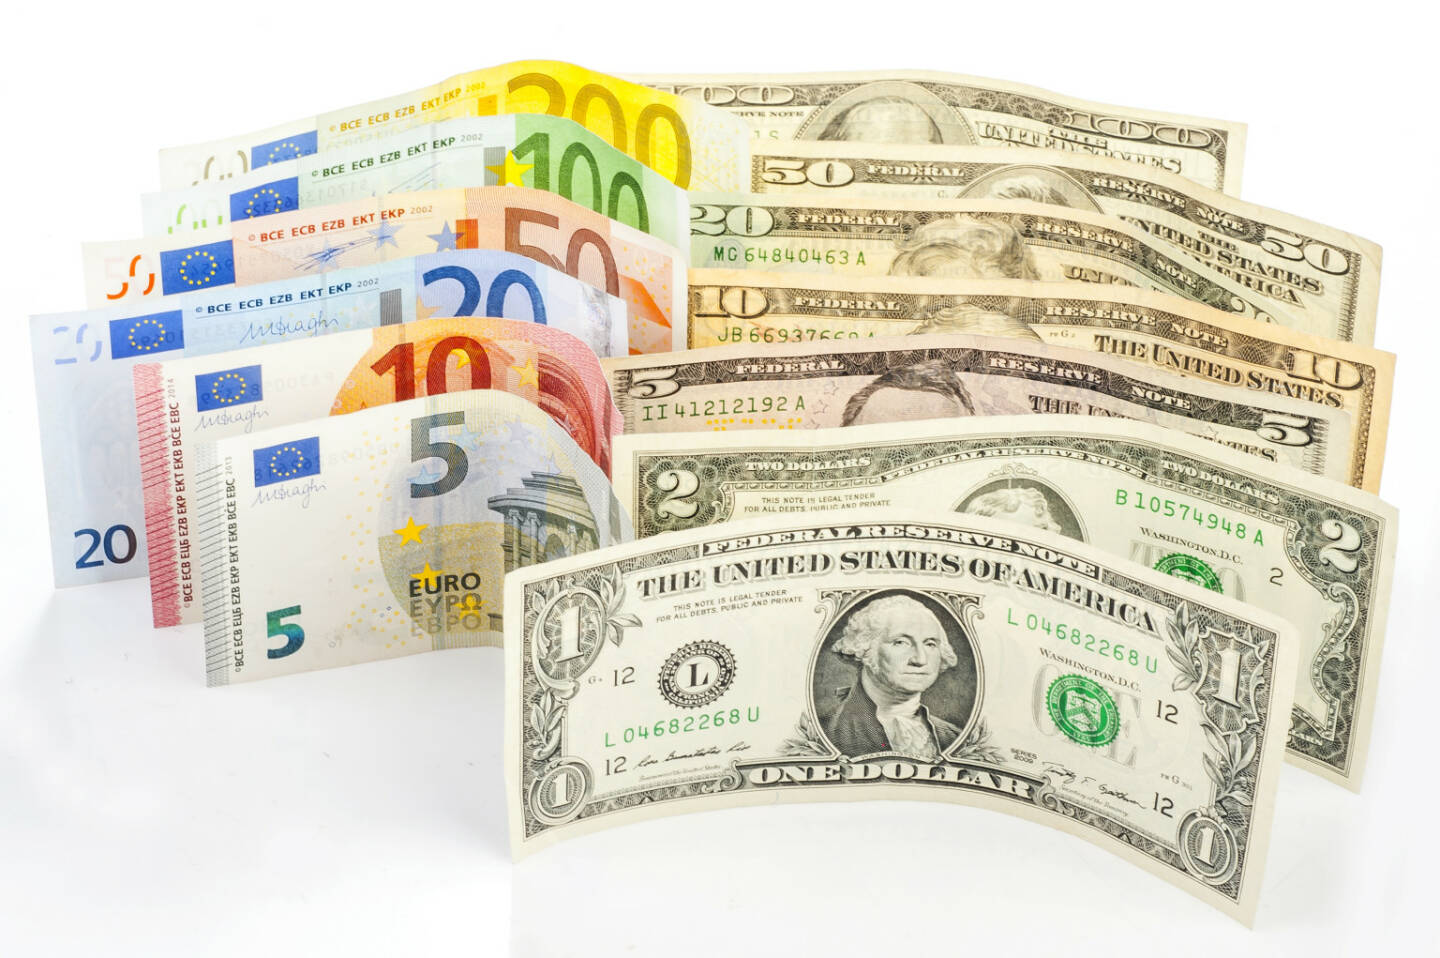 Euro, Dollar, Banknoten - http://www.shutterstock.com/de/pic-258340211/stock-photo-two-leading-hard-currencies-us-dollar-and-euro.html